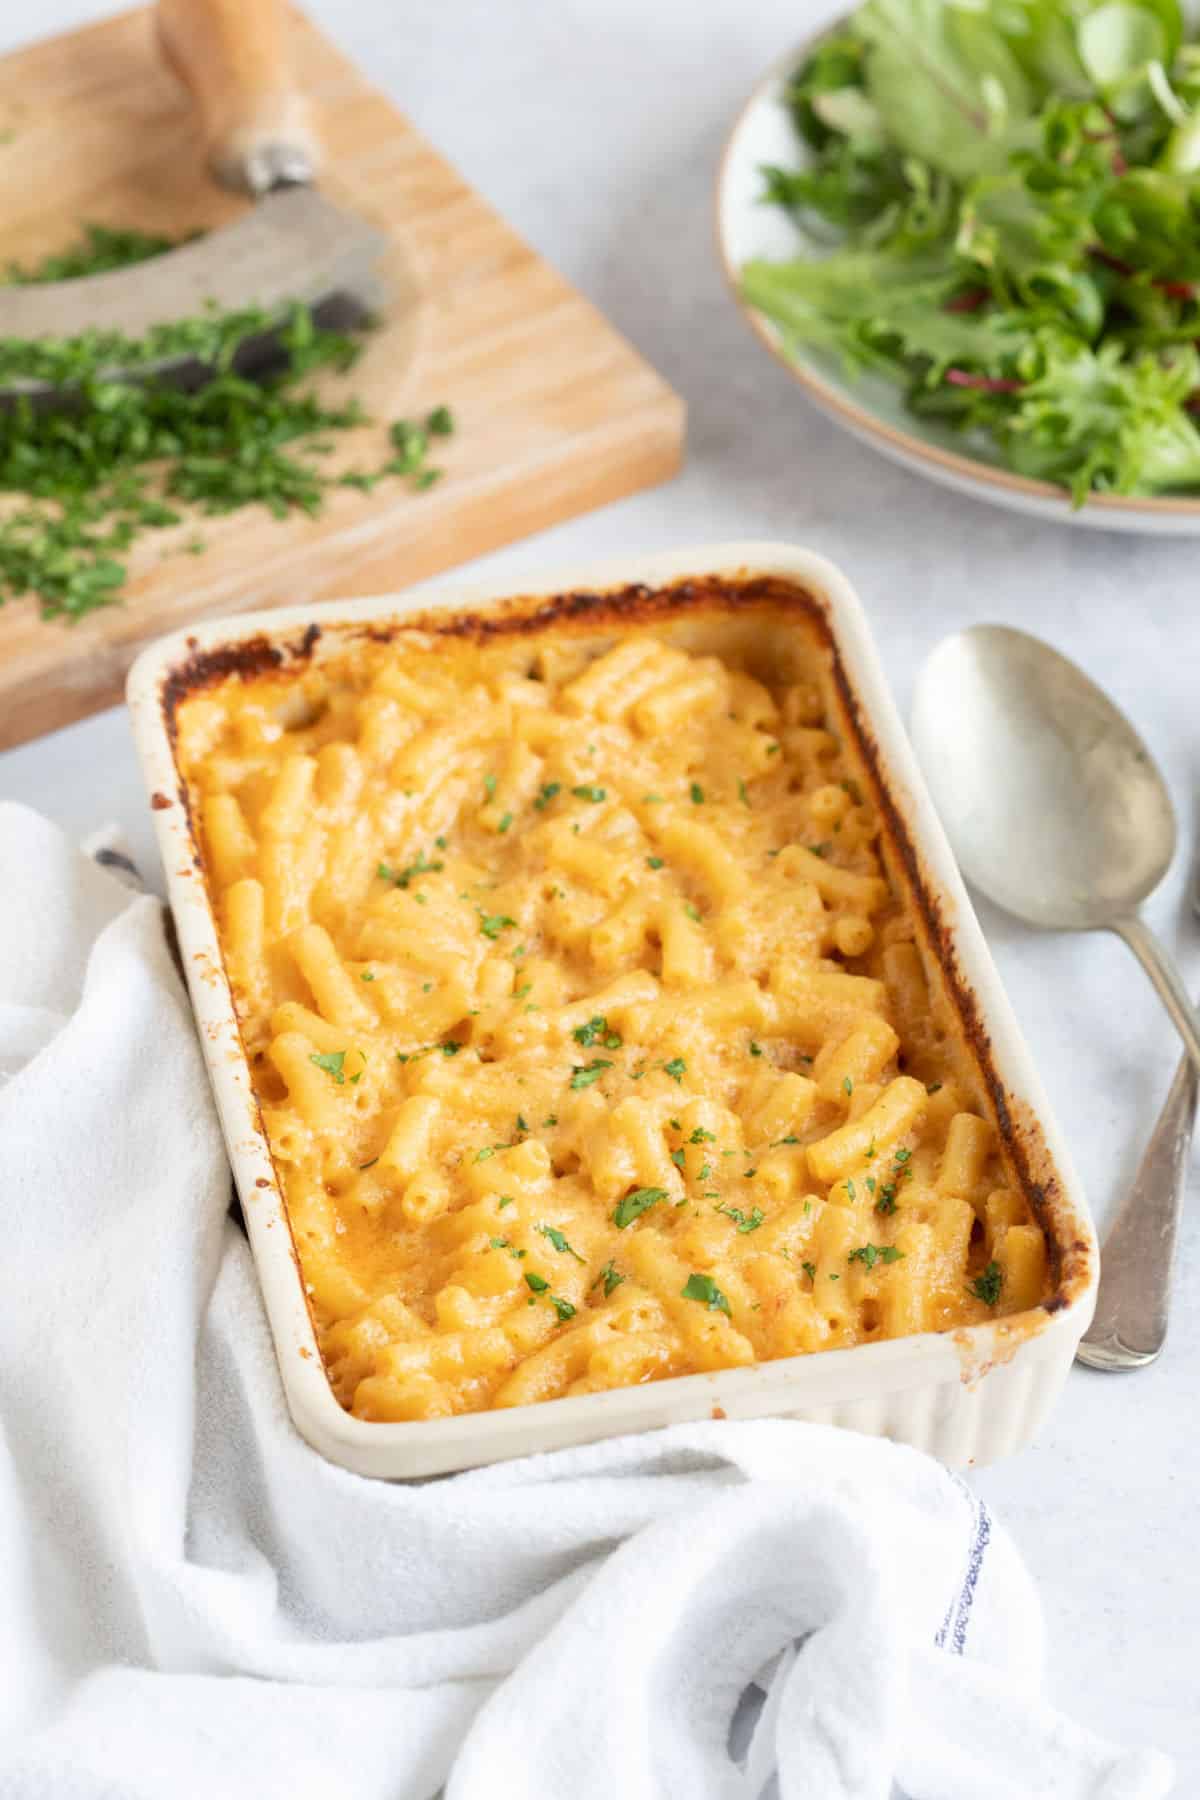 Air fryer mac and cheese garnished with parsley.